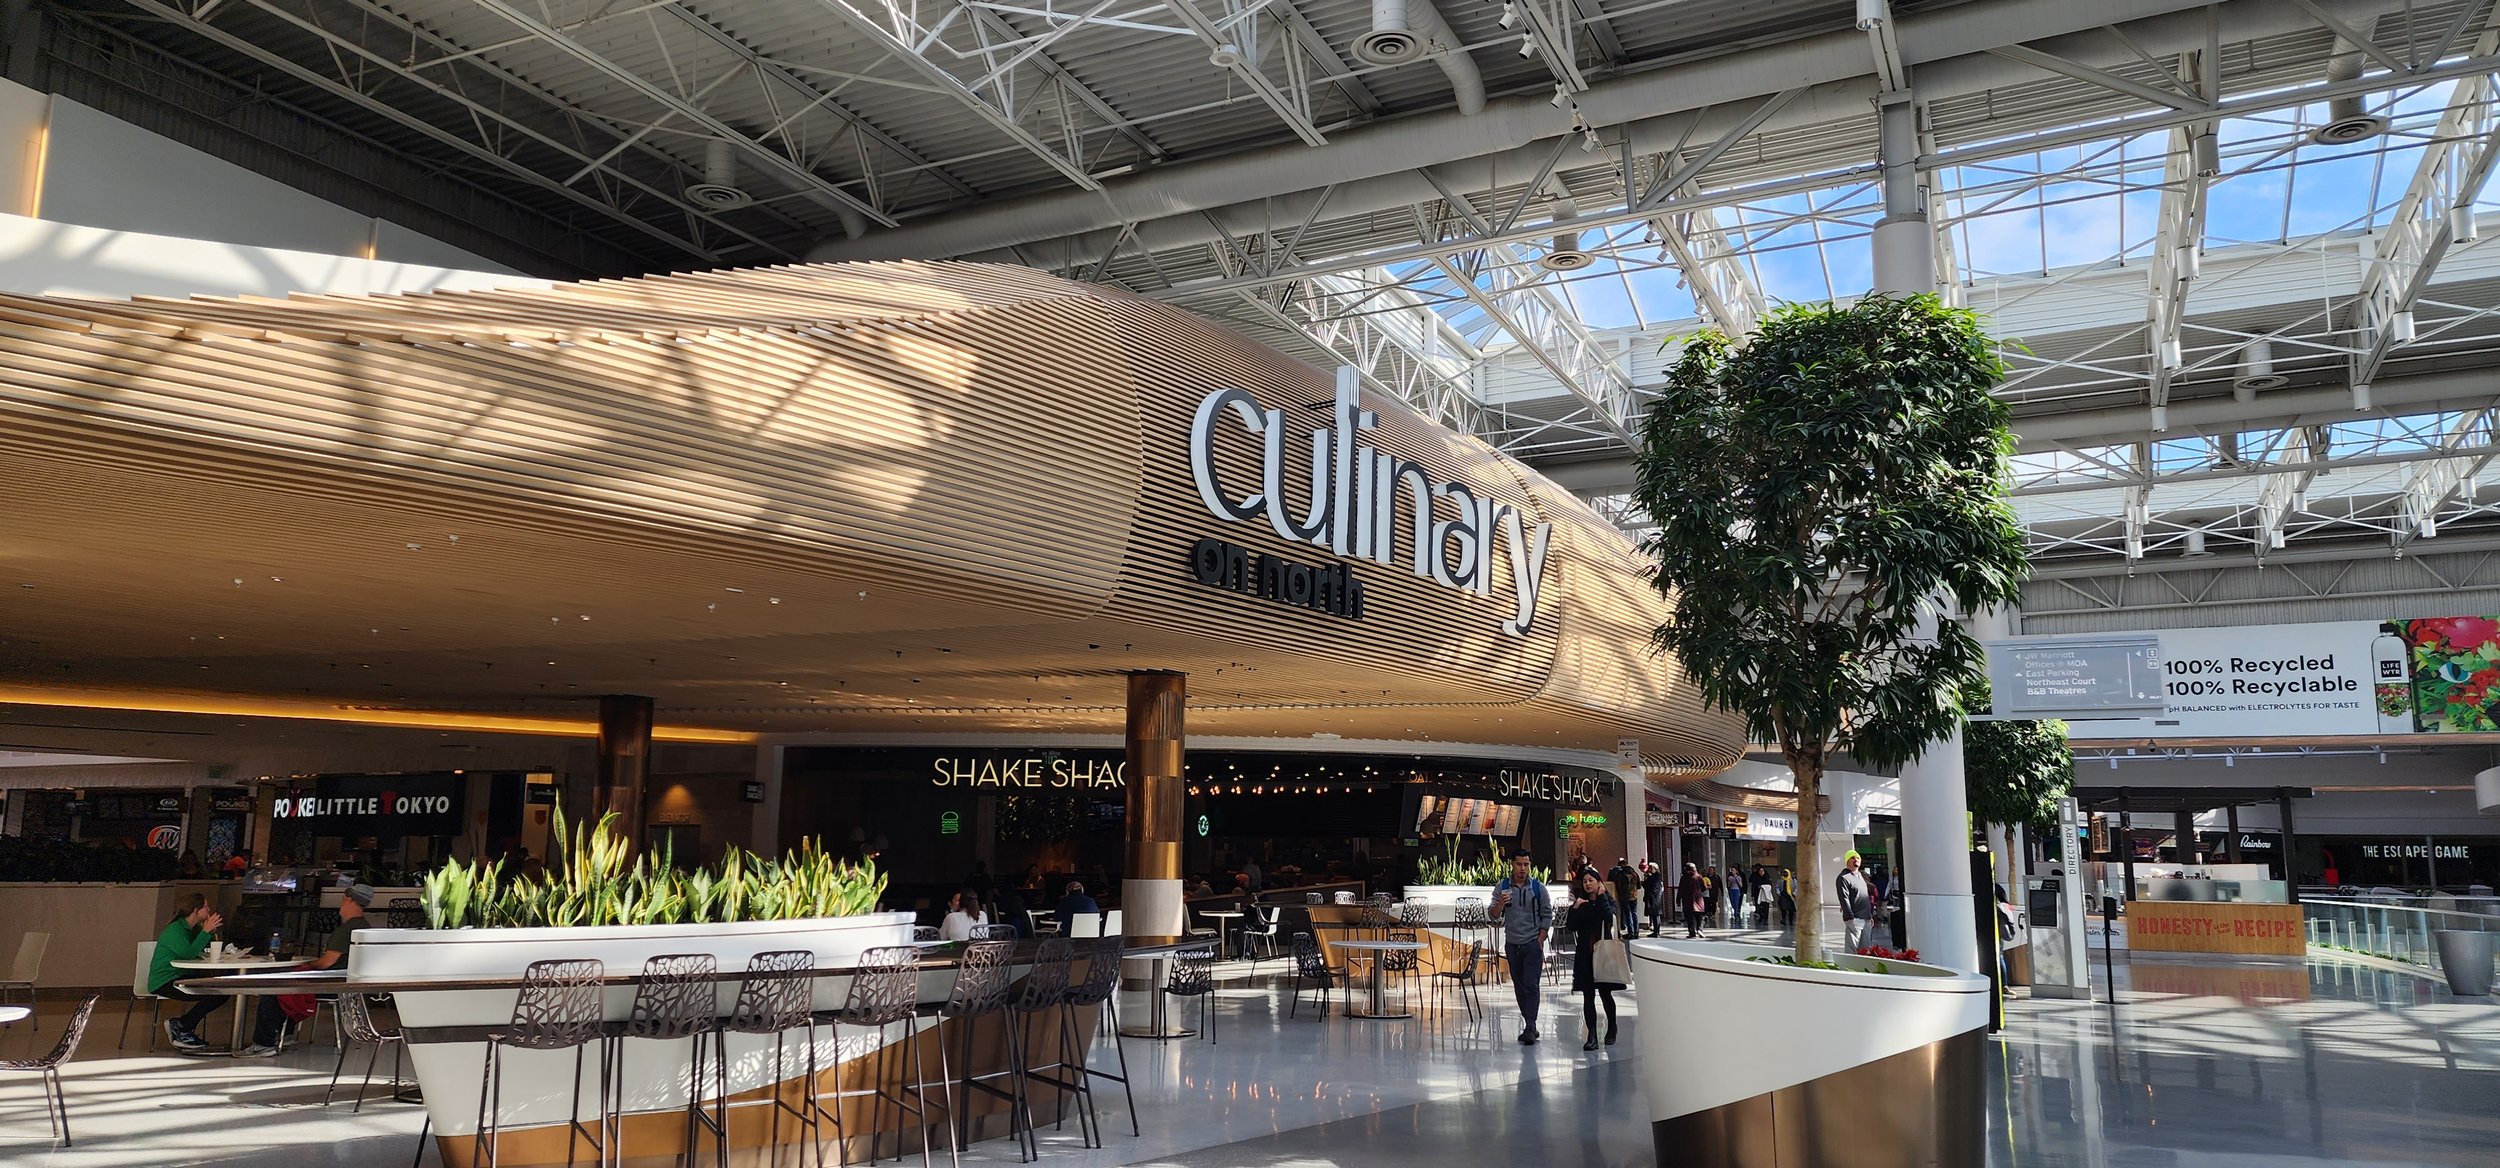 Mall of America - It's time to get cooking with the